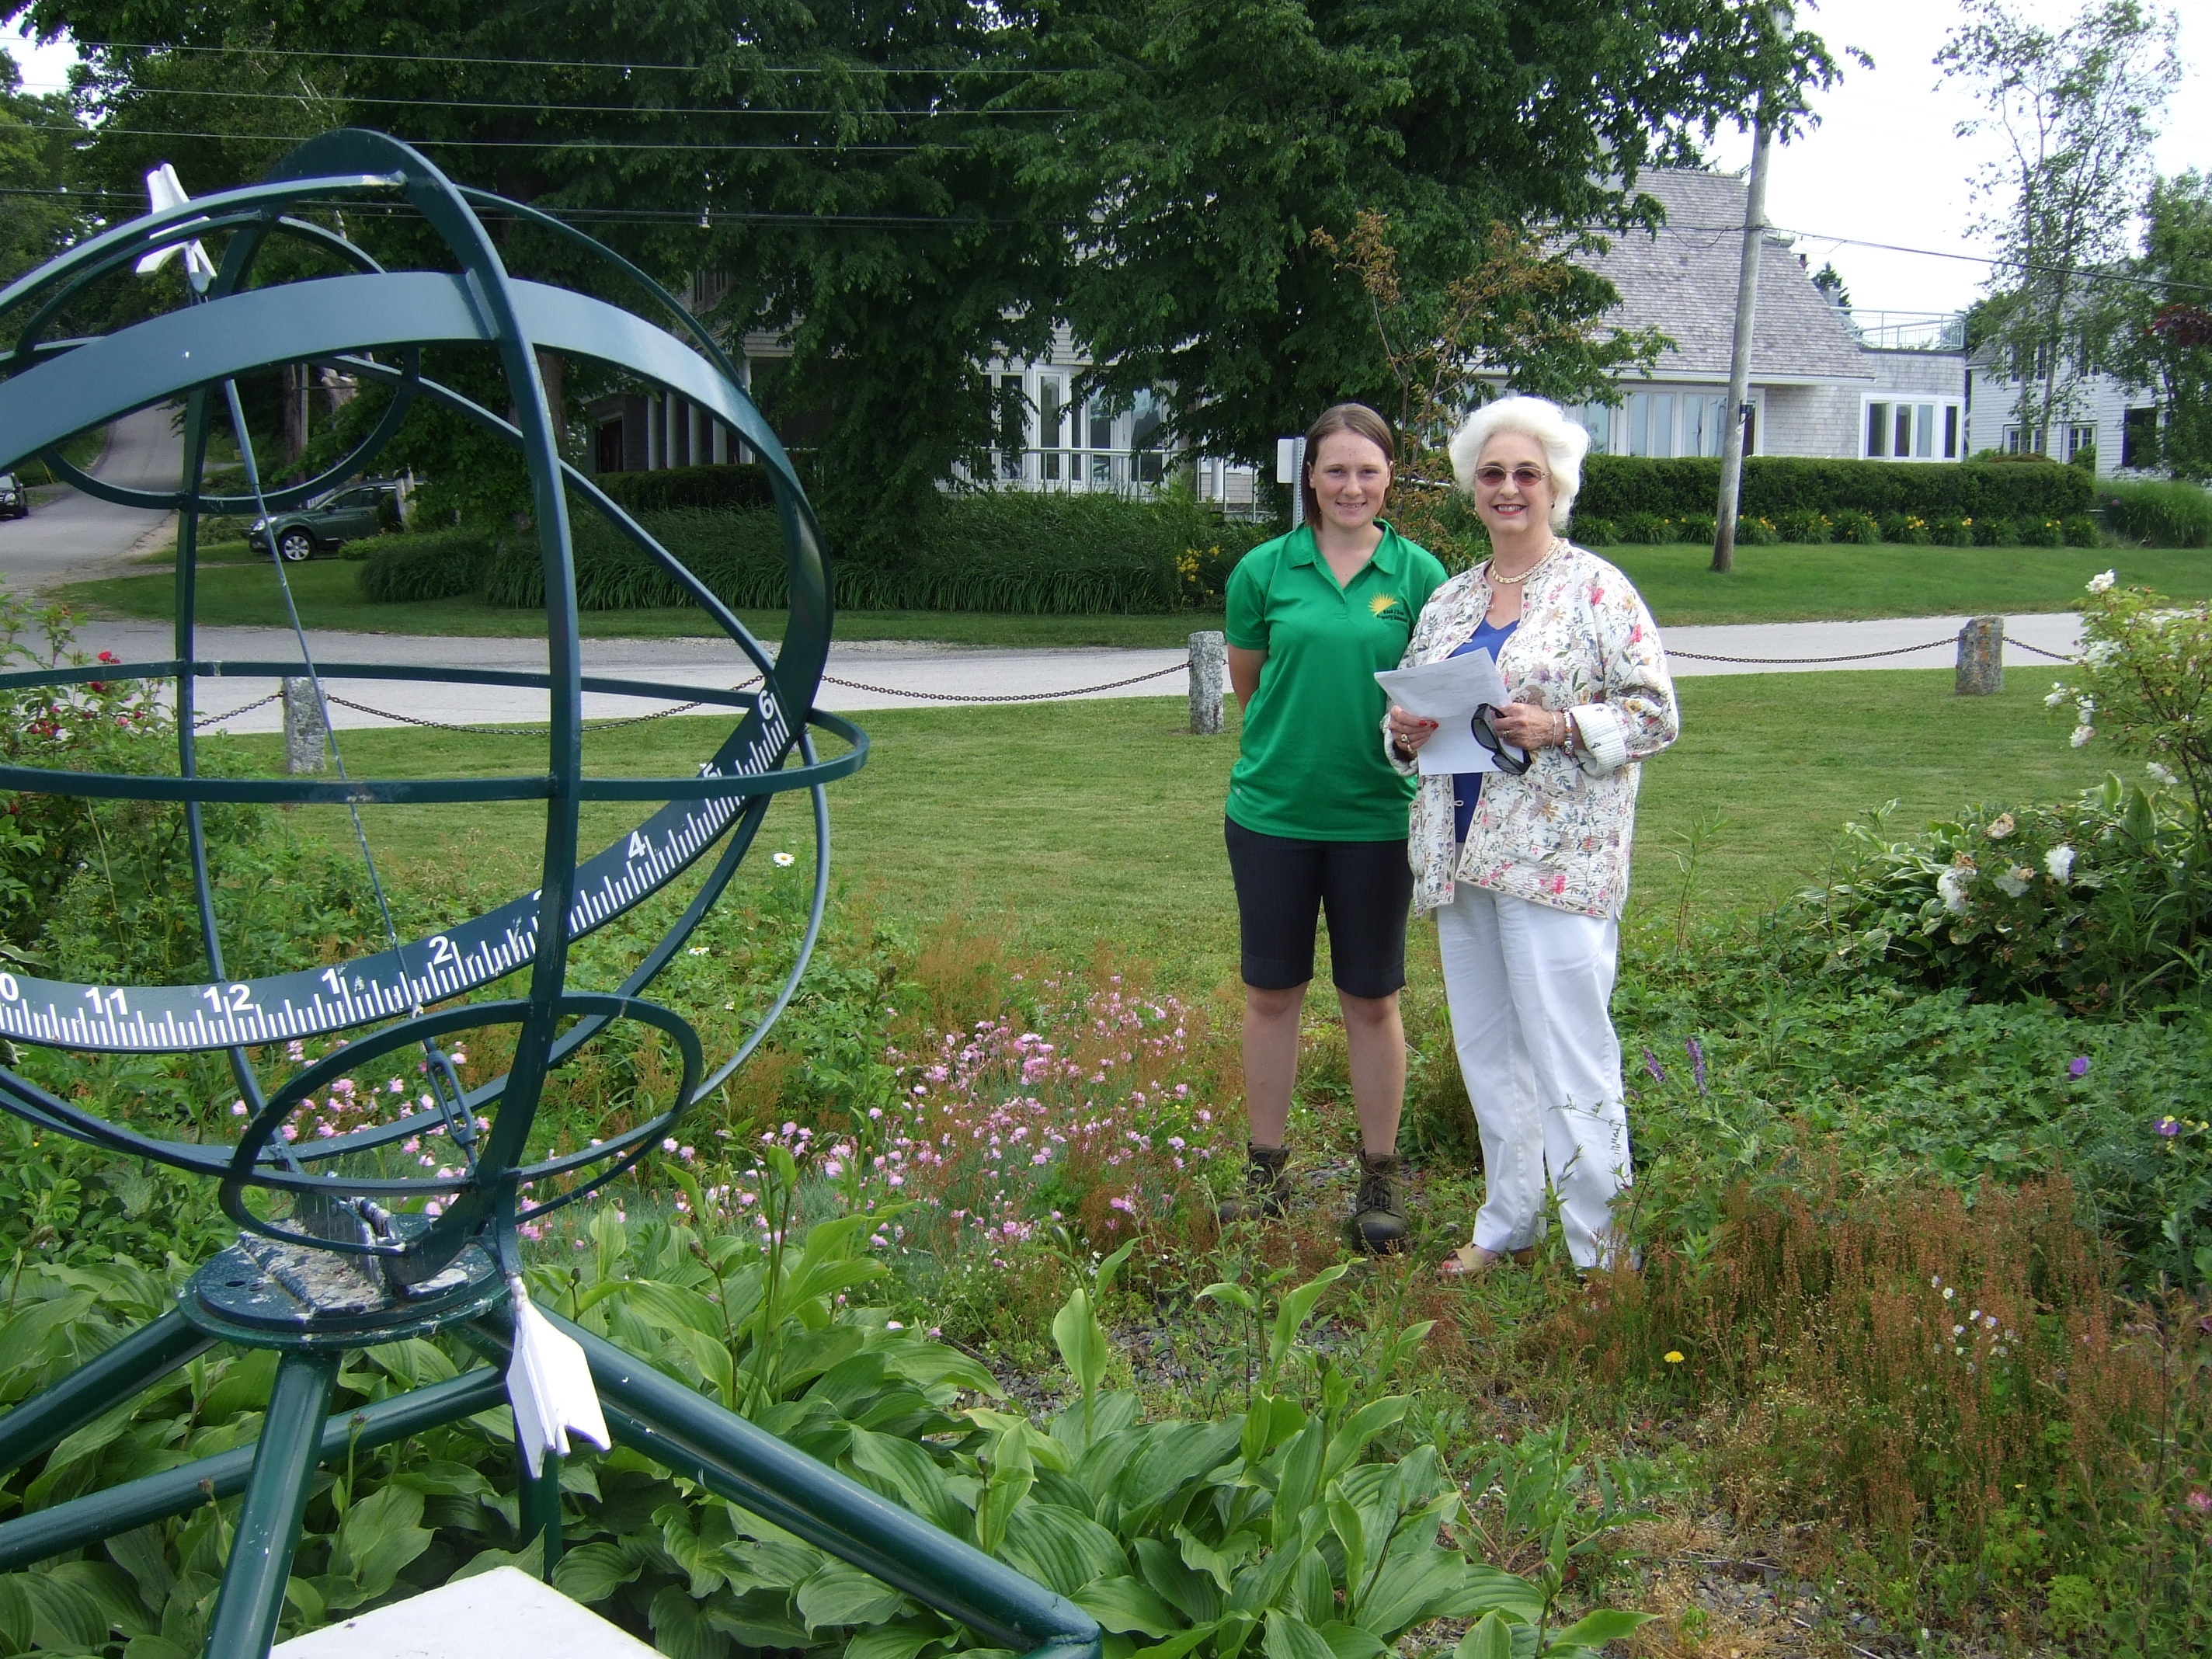 armillary sphere and weedy park